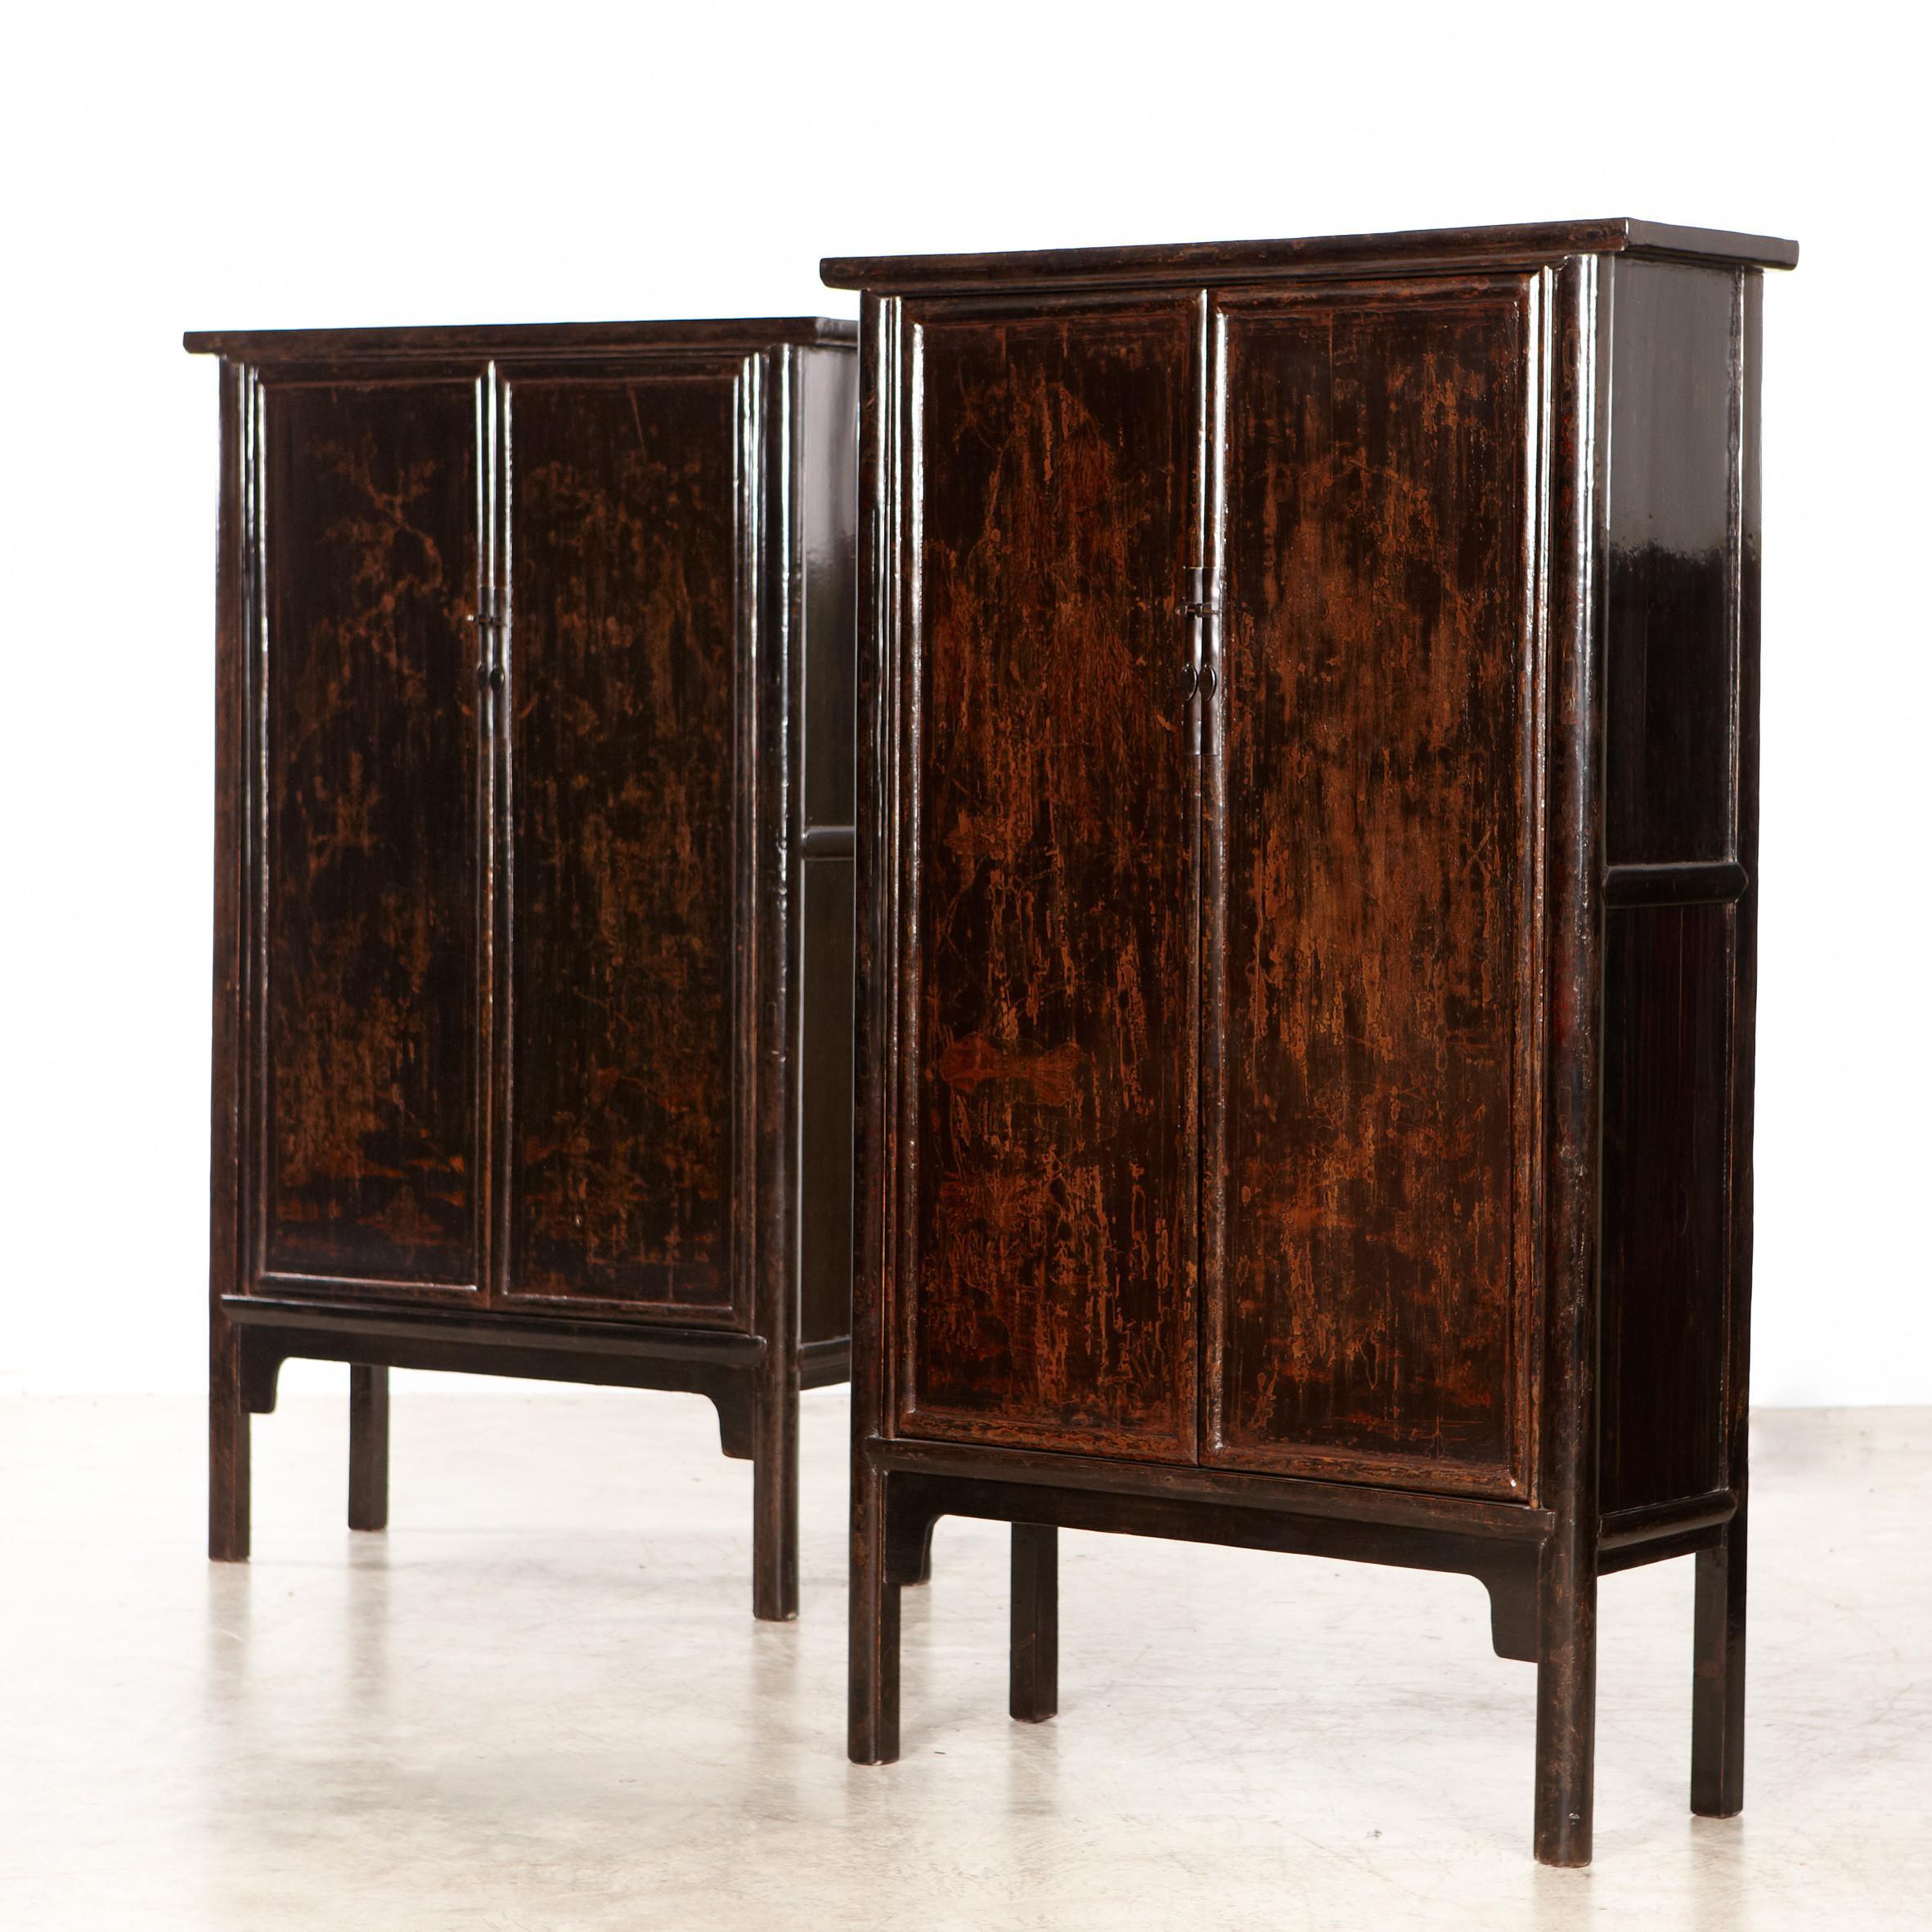 Qing Cabinet from Ming Dynasty China 18th Century Black Burgundy Lacquer Patina